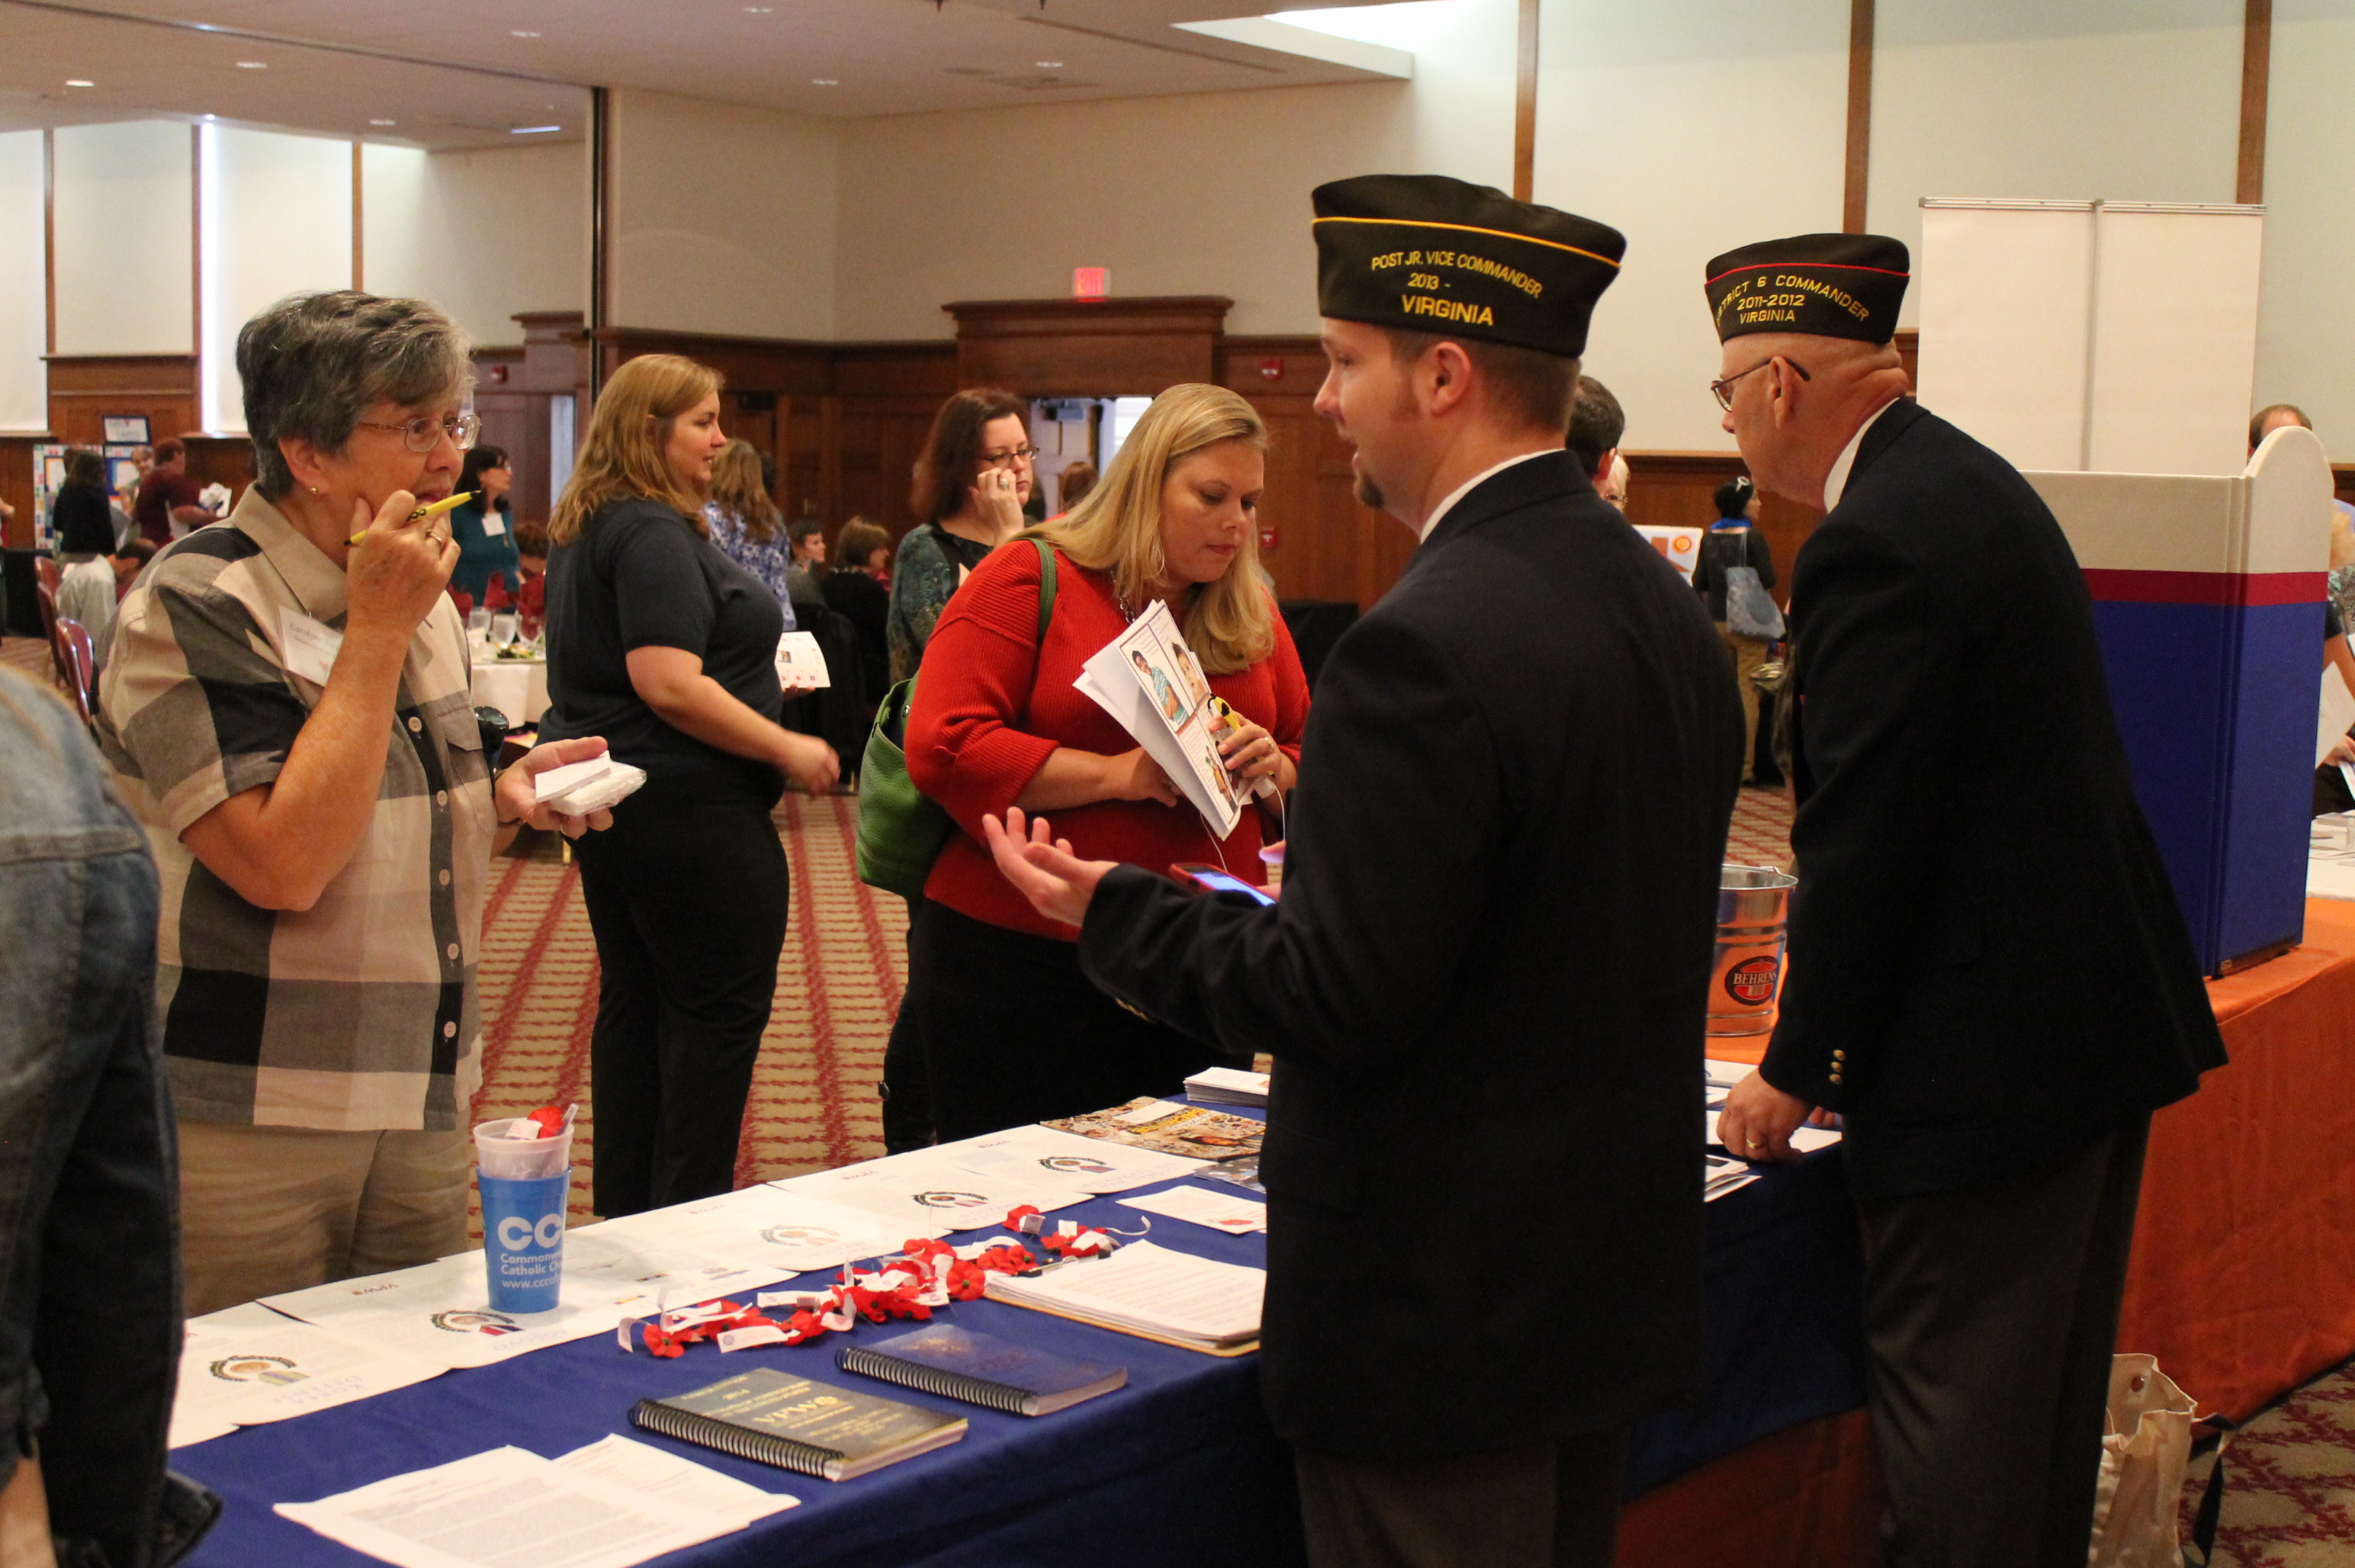 Representatives from the Veterans of Foreign Wars speak with guests at the Sept. 25, 2013, Commonwealth of Virginia Kick-off Luncheon.